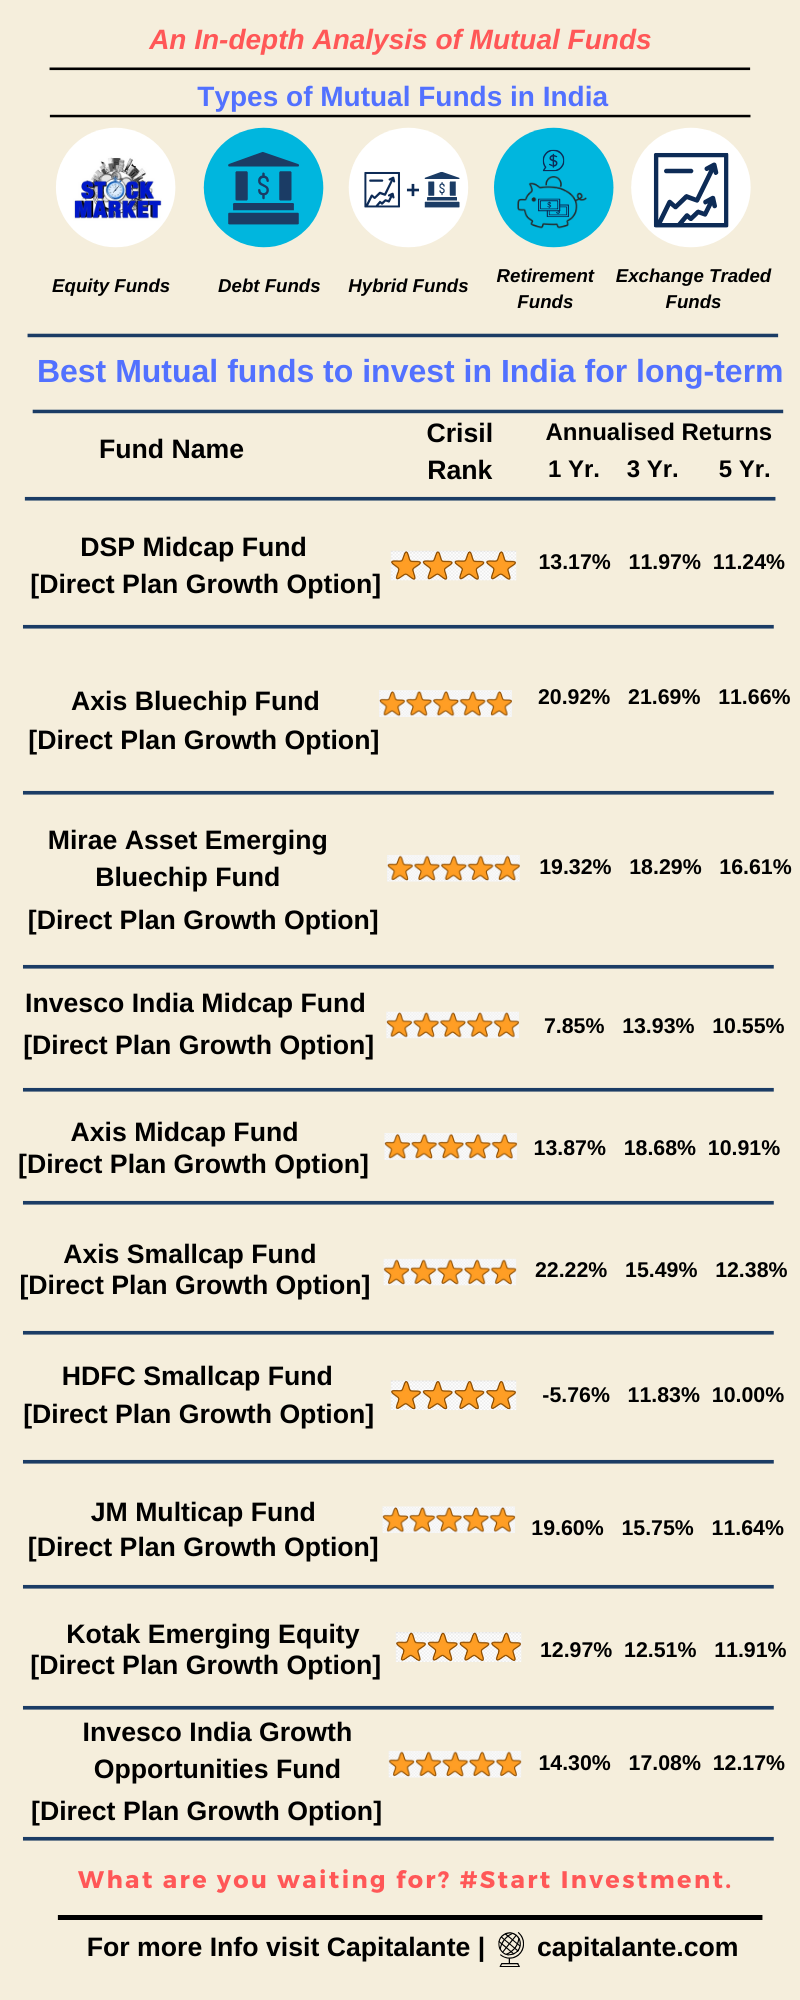 Best Mutual funds to Invest